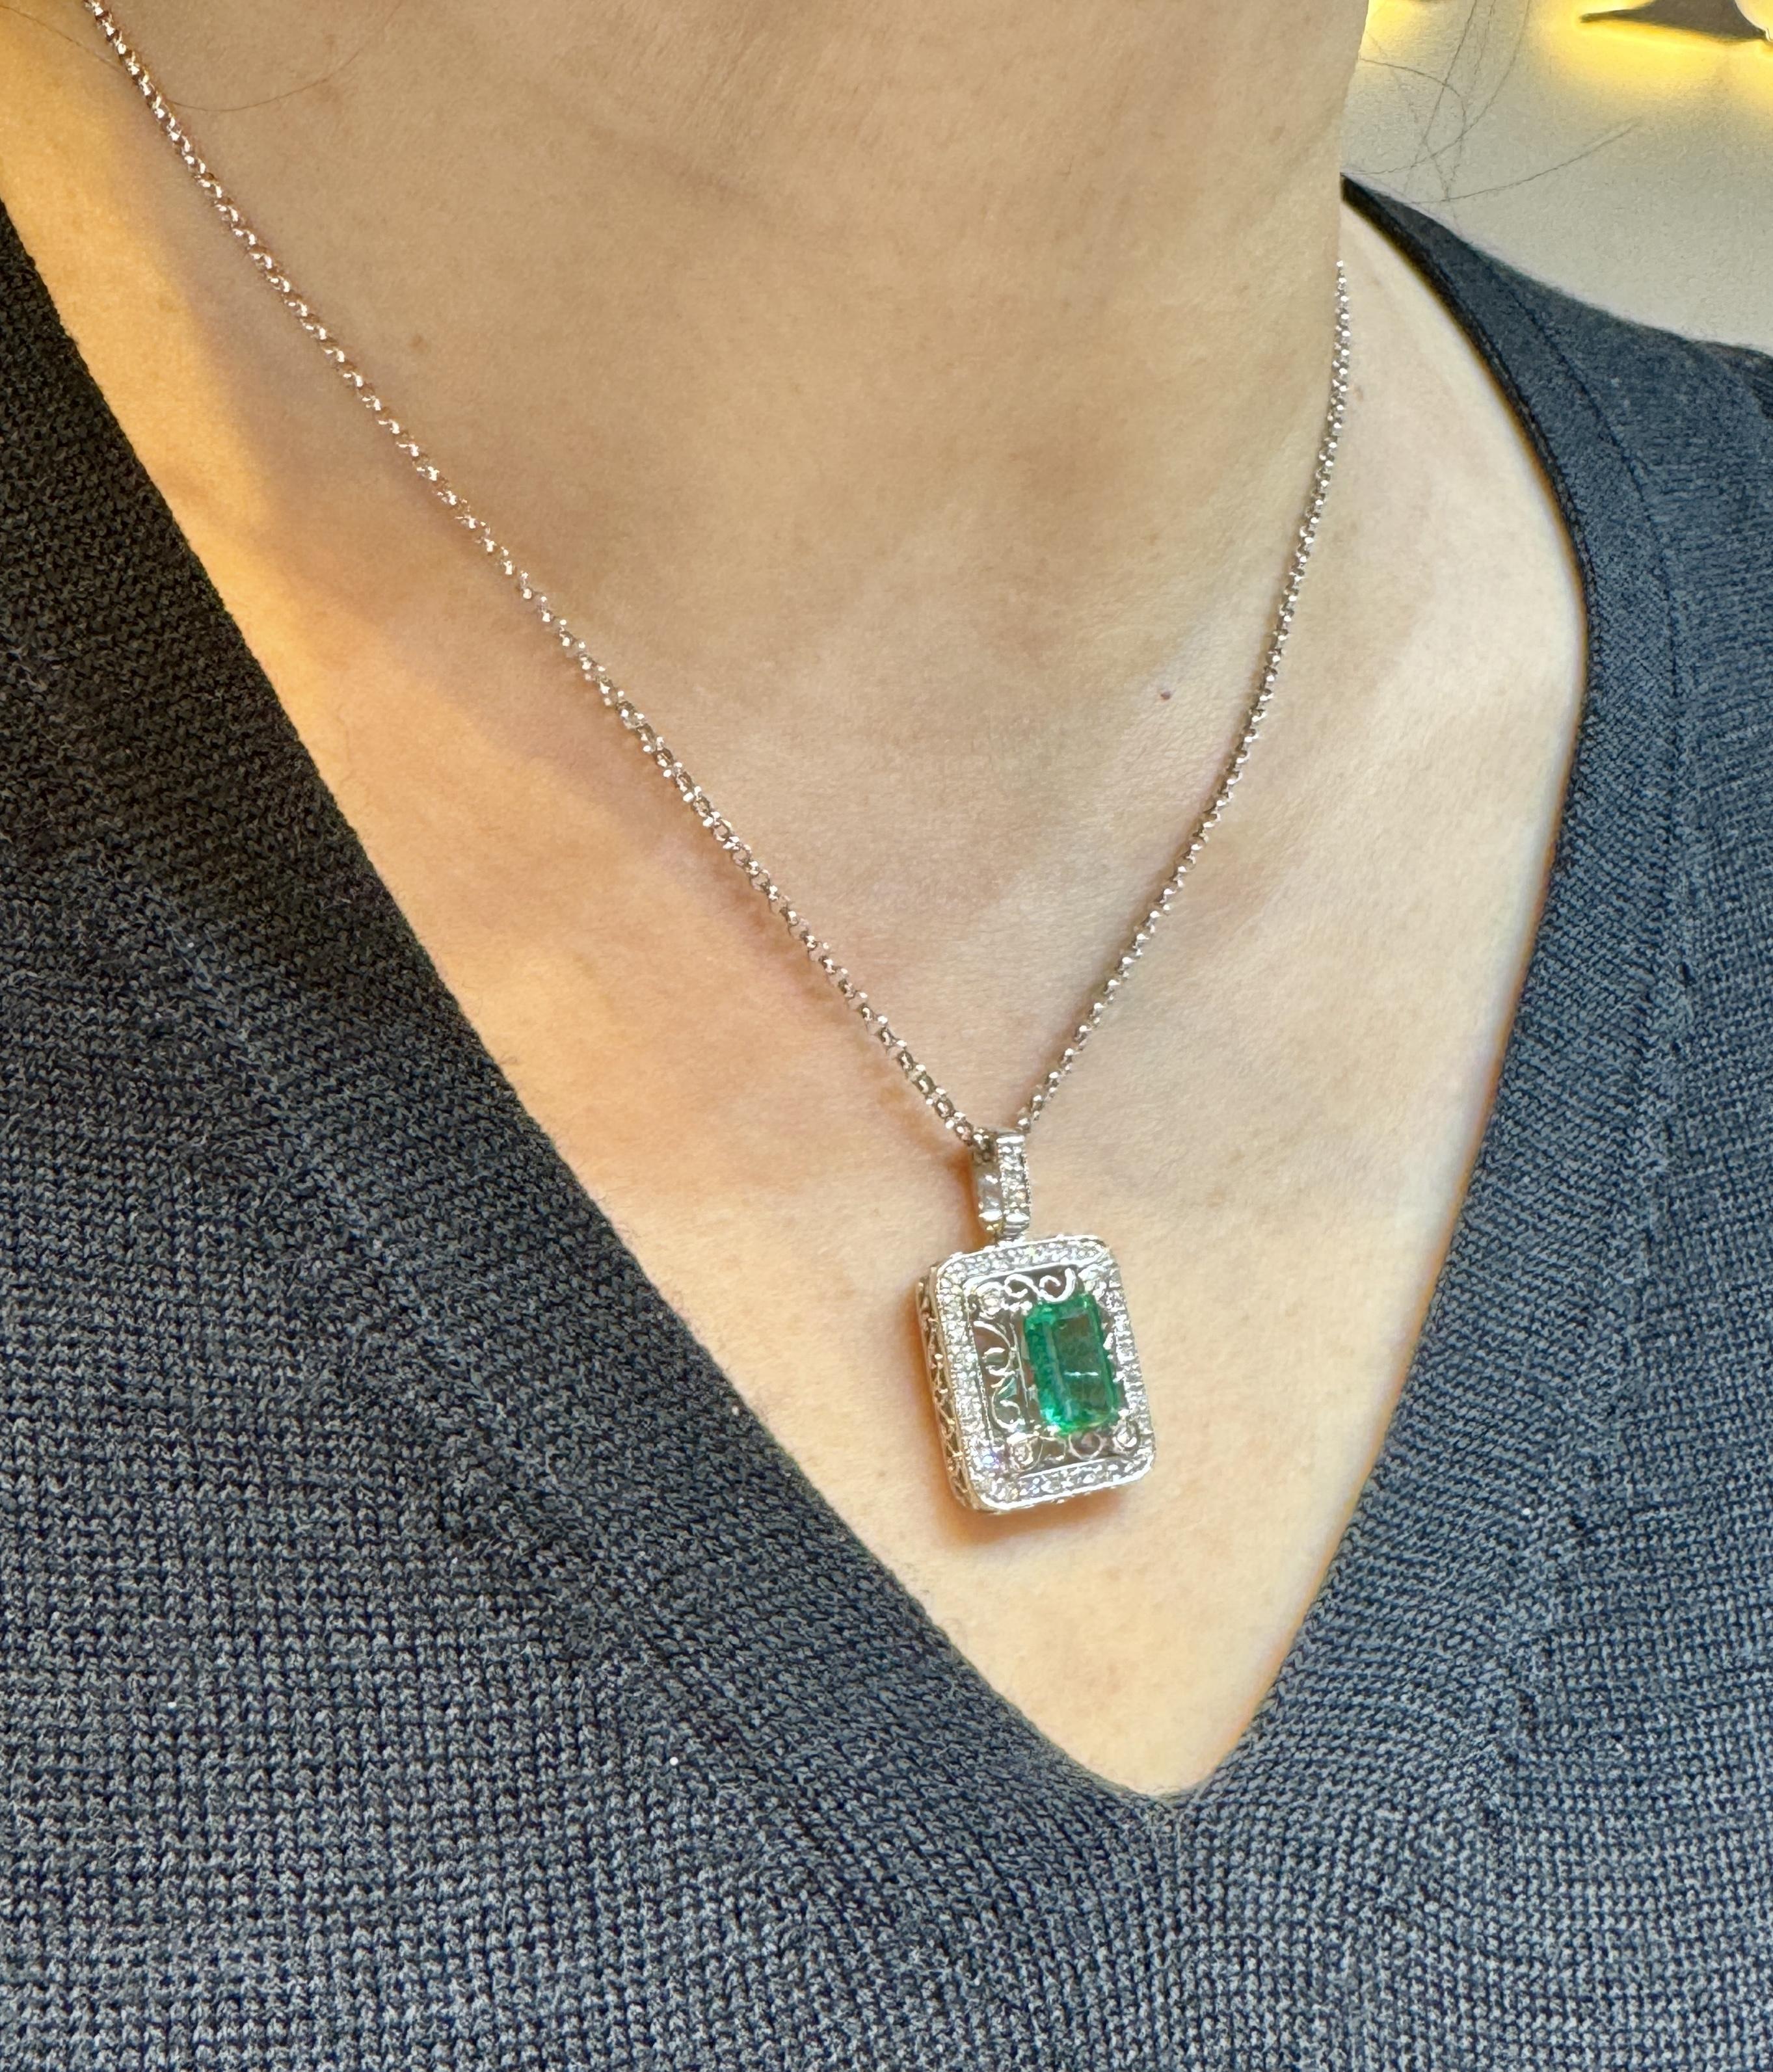 GIA Certified 1.39 Carat F2 Zambia Emerald Floating and Diamond Floral Pattern Pendant 18K Gold Necklace. 

Floating pendant necklace featuring a GIA certified Zambia origin 1.39 carat natural emerald center stone. Paired with 39 natural round-cut